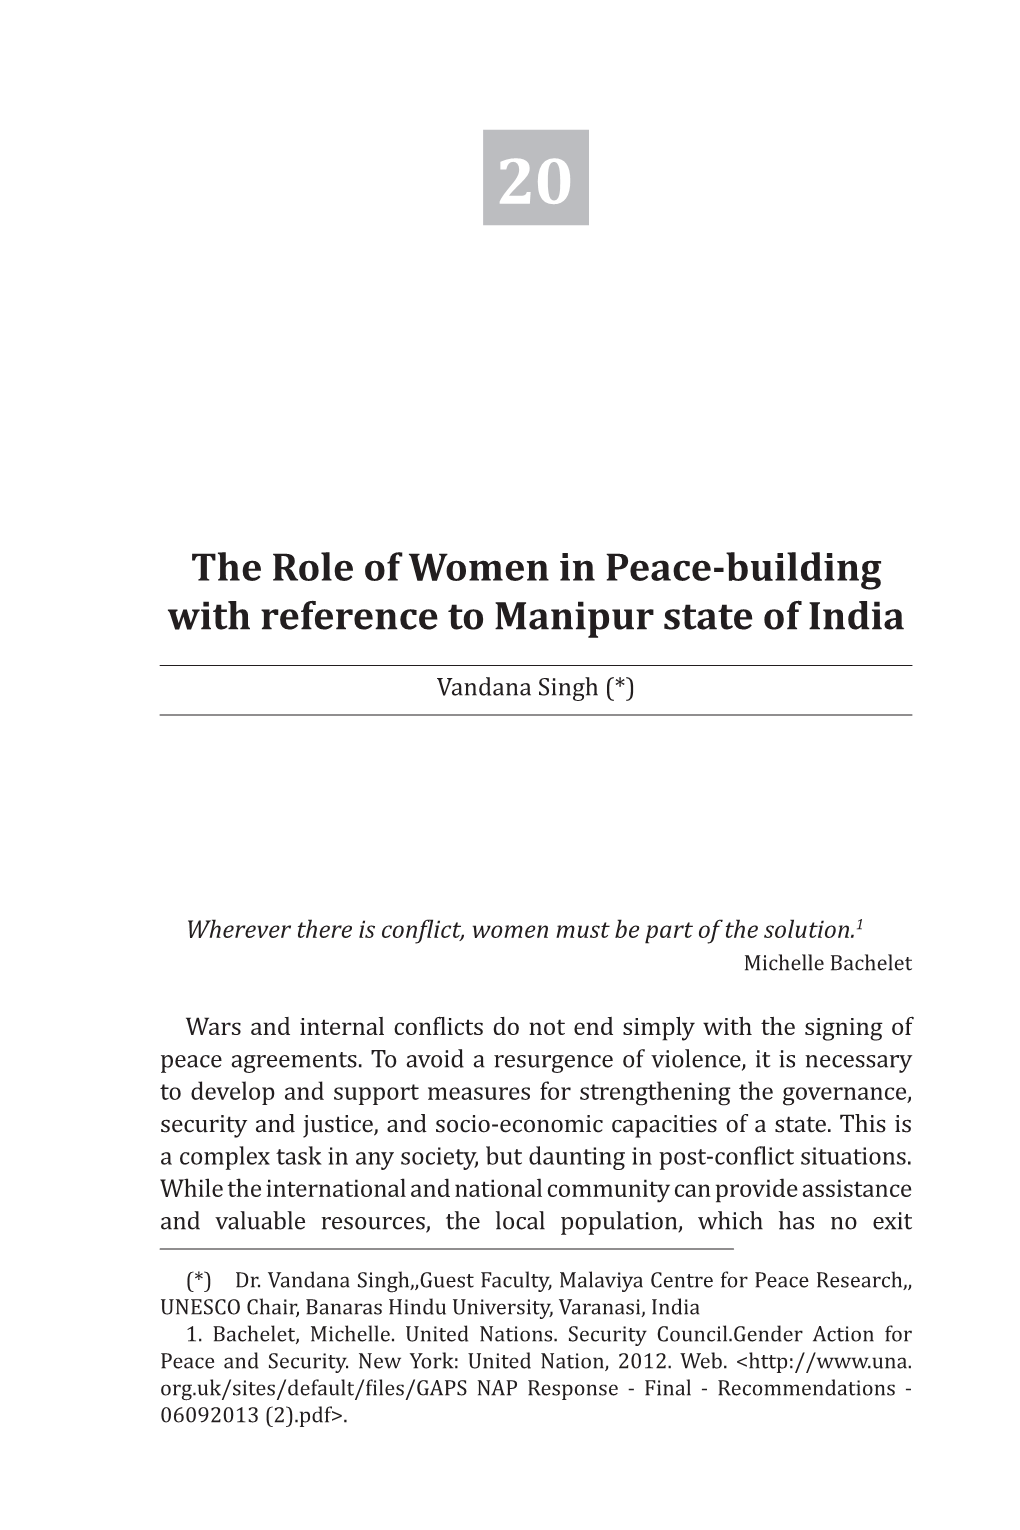 The Role of Women in Peace-Building with Reference to Manipur State of India